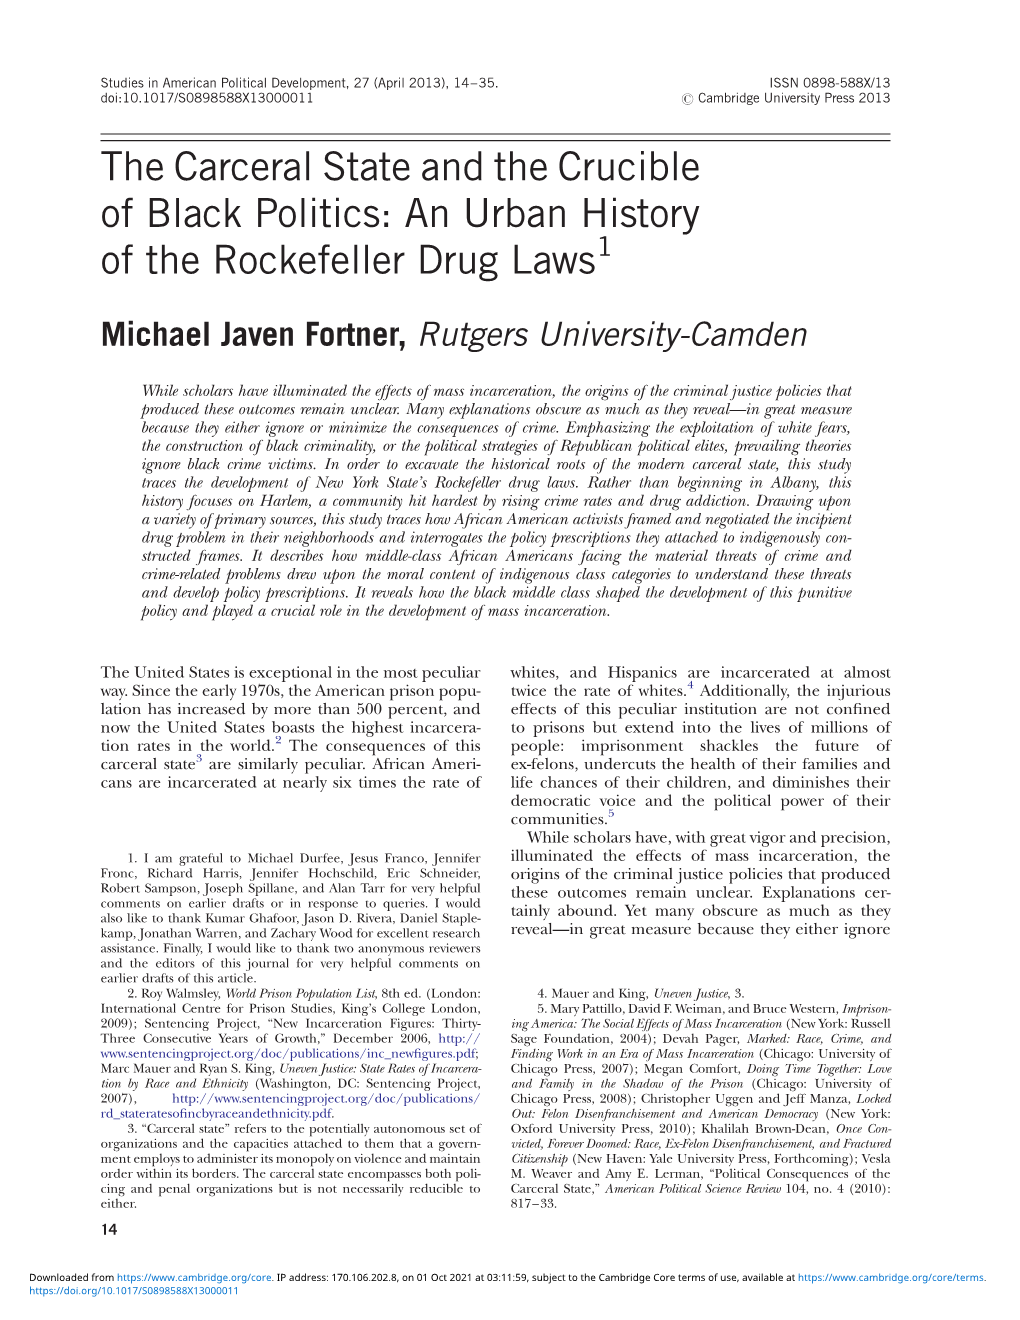 The Carceral State and the Crucible of Black Politics: an Urban History of the Rockefeller Drug Laws1